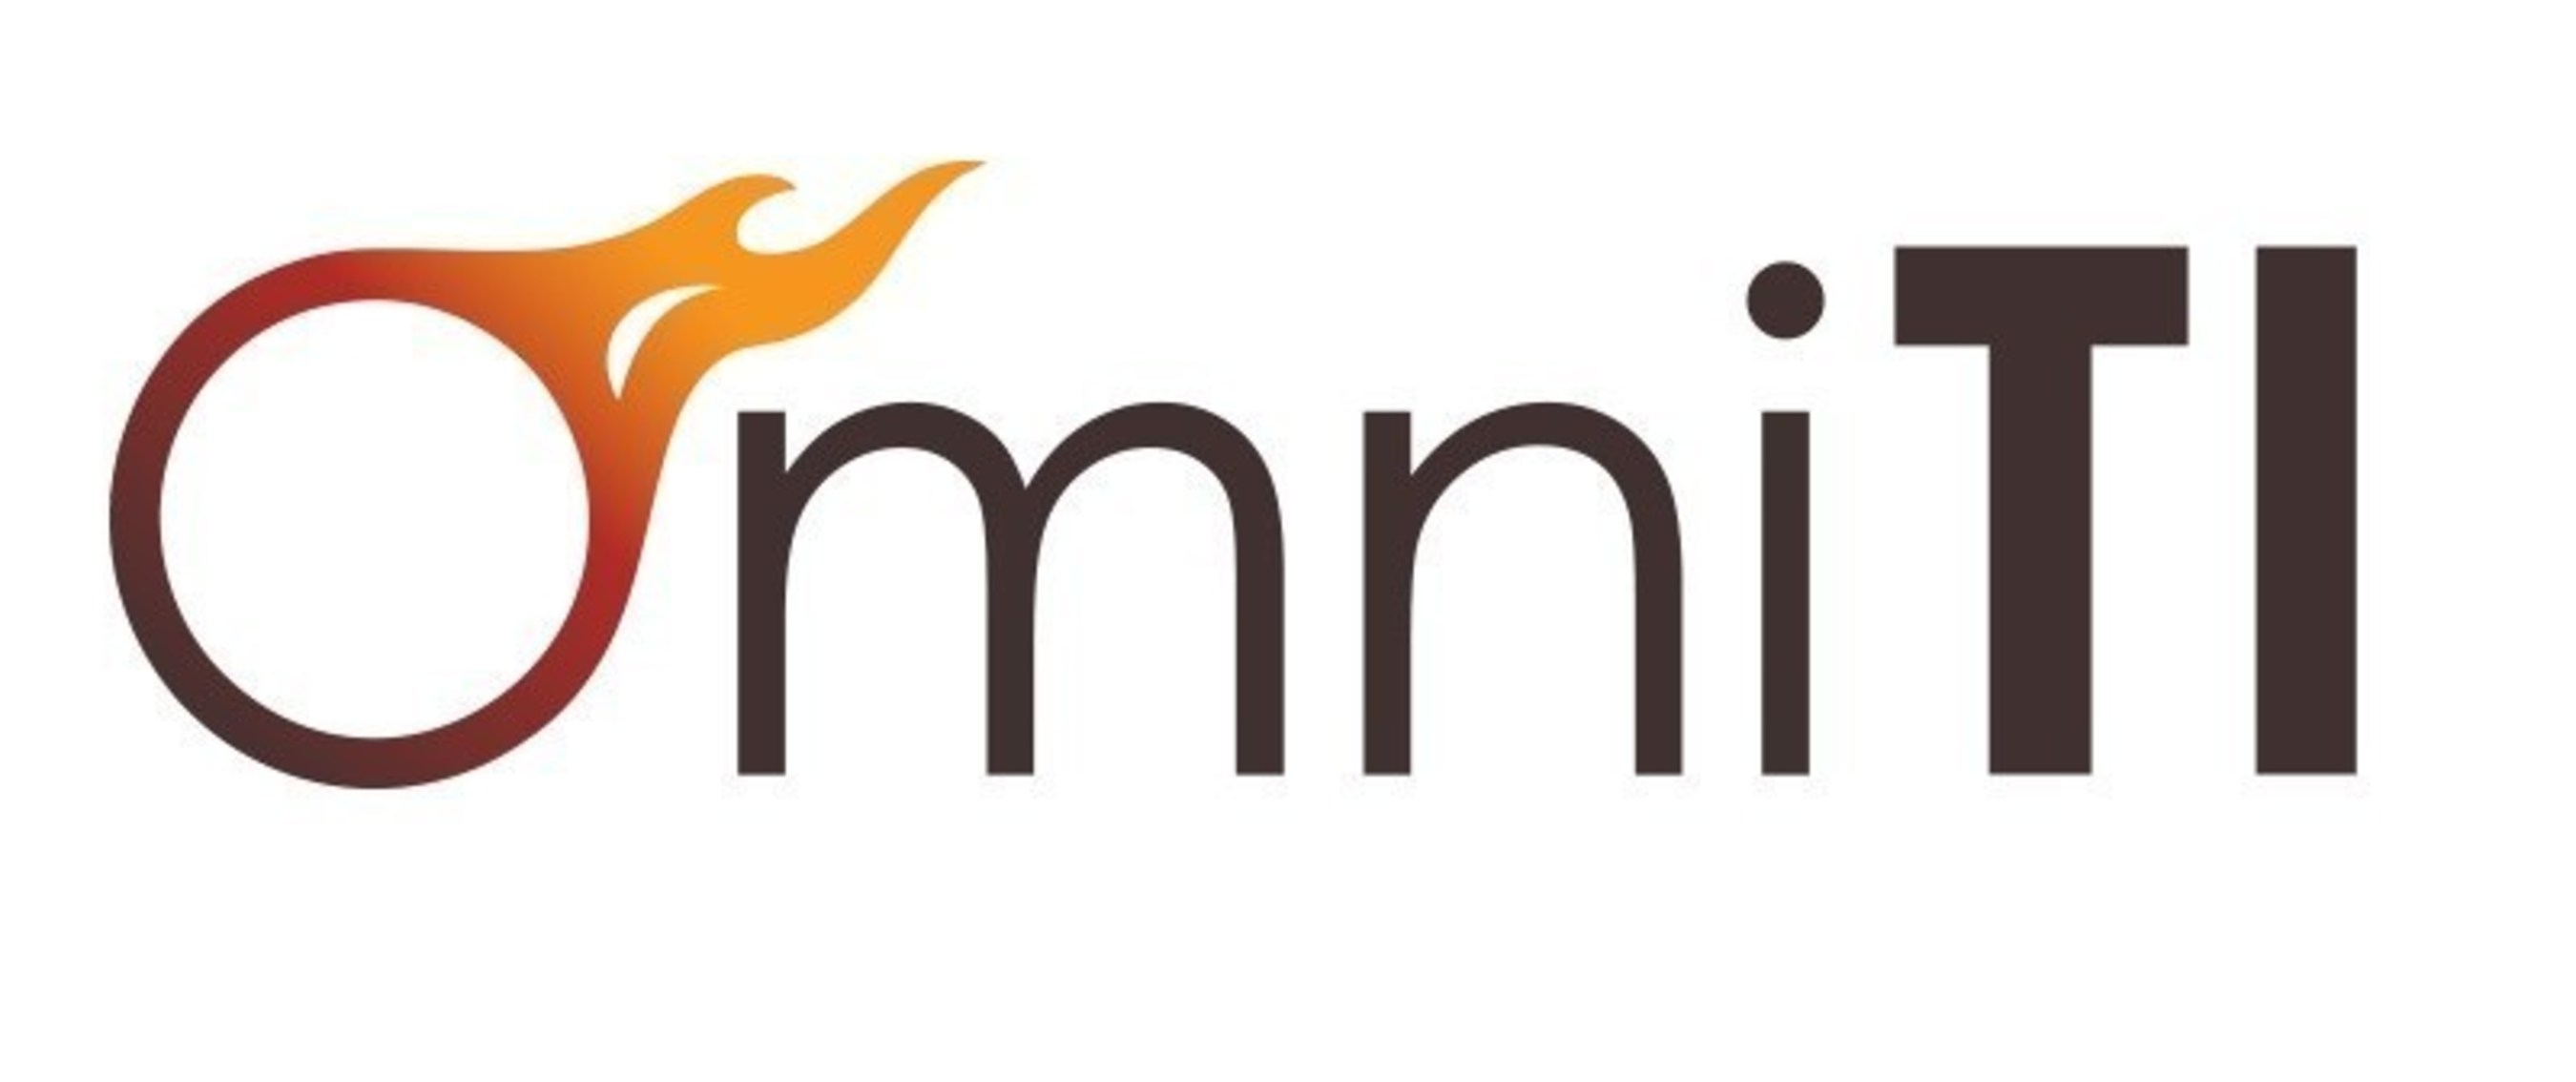 For companies experiencing issues associated with growth and scalability of their customer-facing websites, OmniTI is the leading Web Scalability and Performance provider using a cross-disciplinary approach to achieve unparalleled levels of web and database performance to enable revenue growth, outstanding customer experience, underlying infrastructure reliability and faster time-to-value.